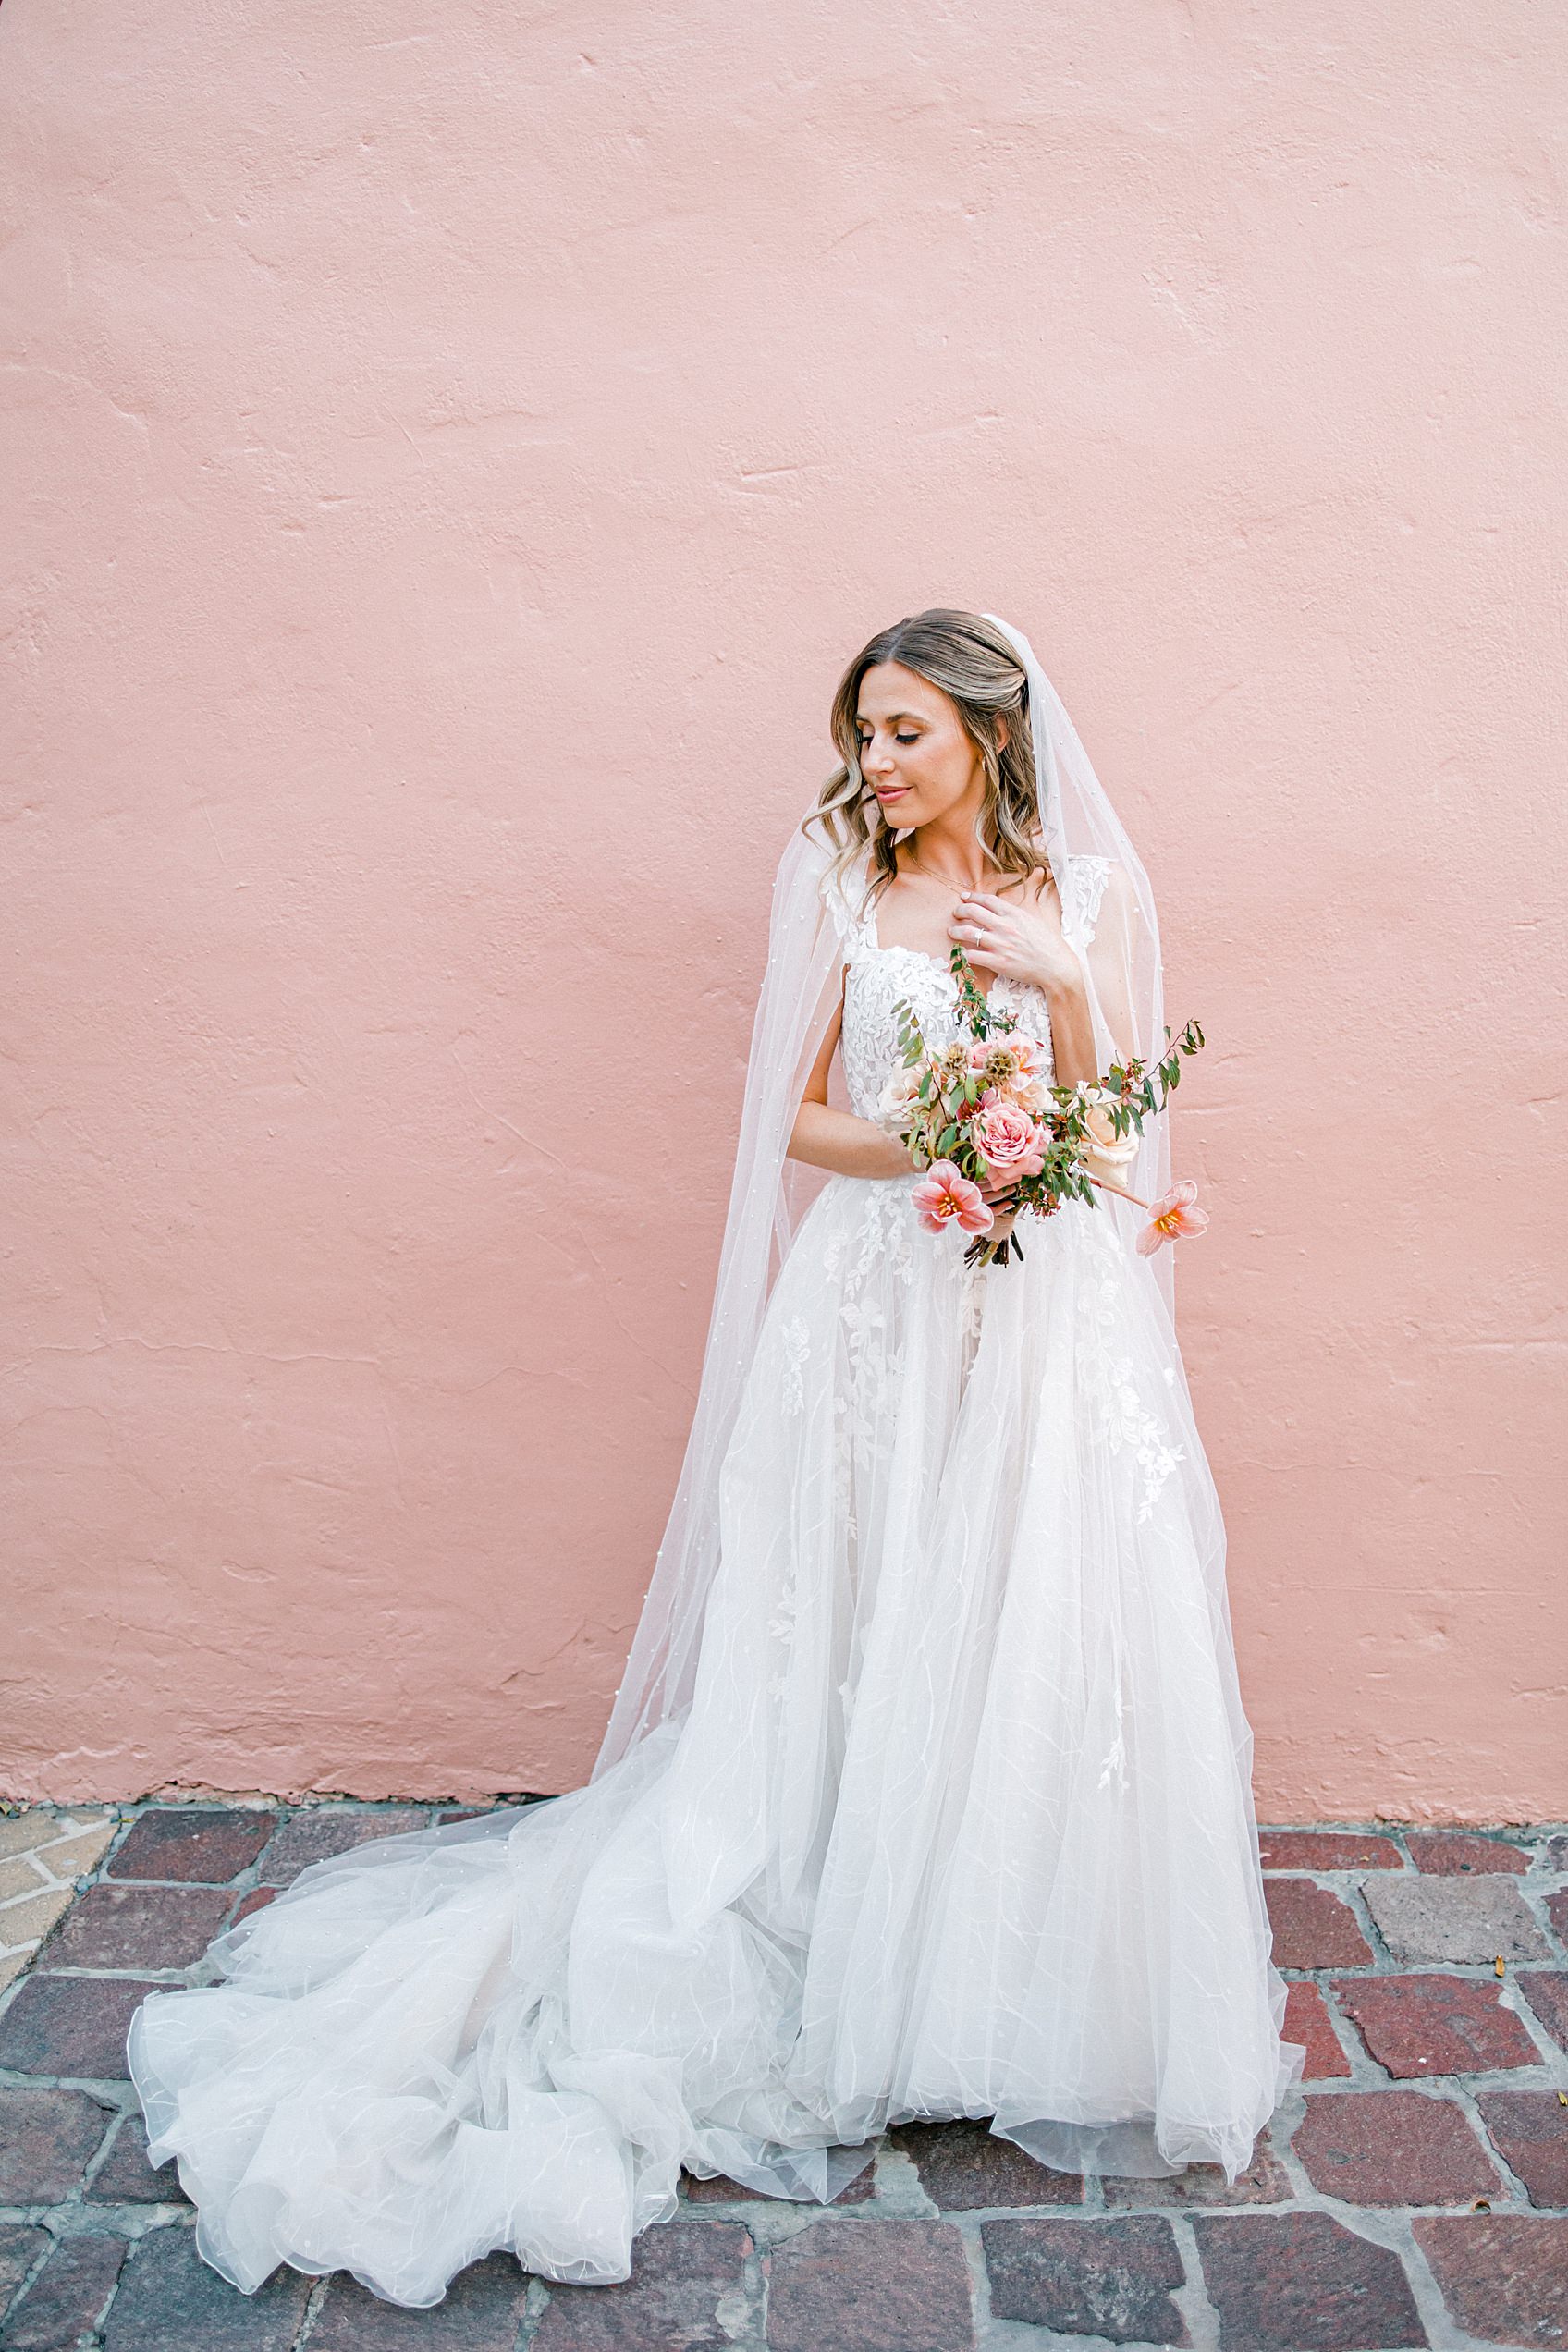 Downtown San Antonio Bridal Photography Session by Allison Jeffers Wedding Photography 0034